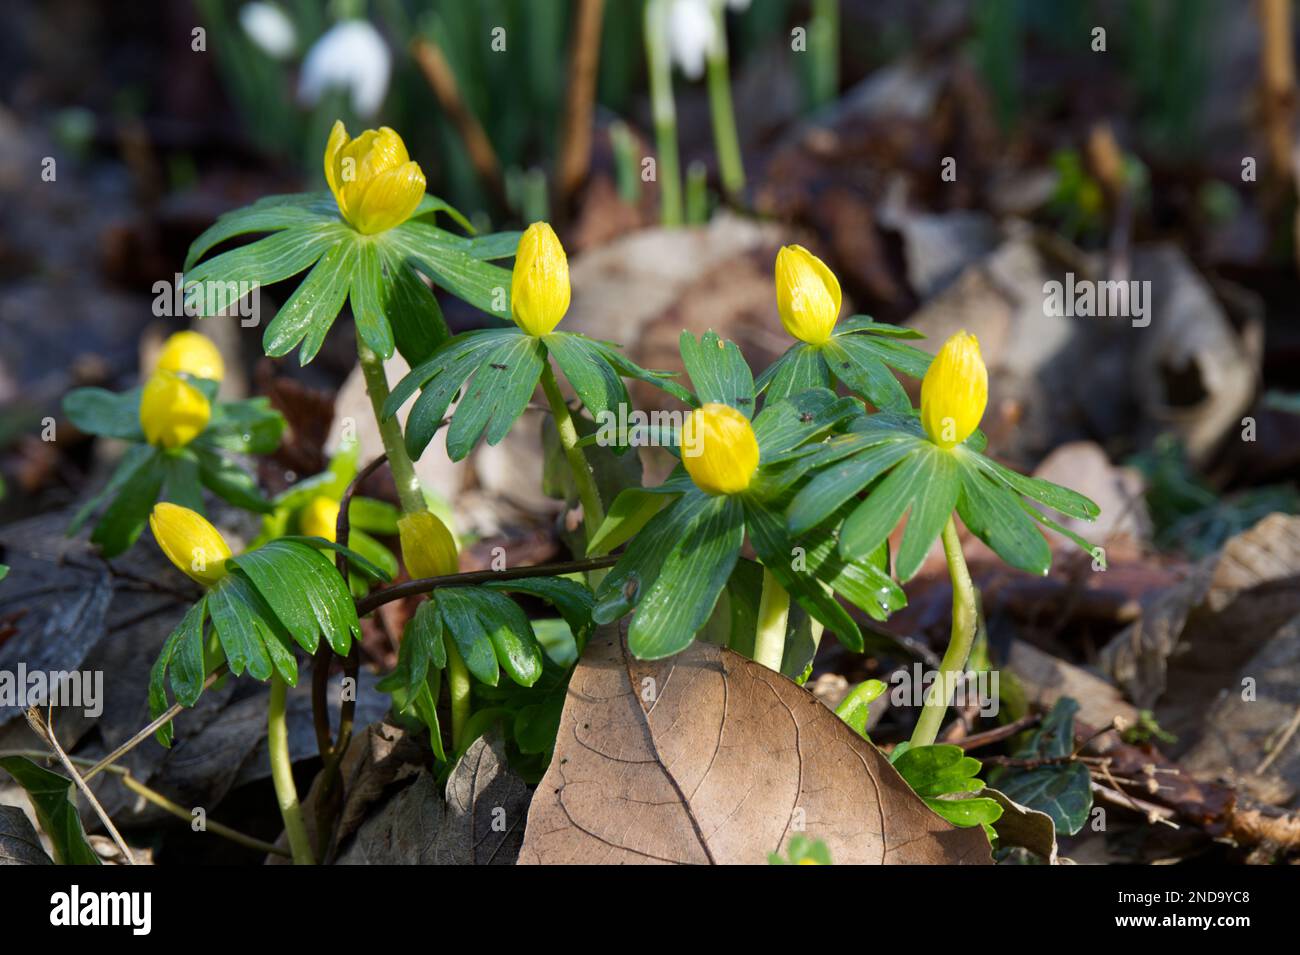 yellow flowers of winter aconites, erenthis hyemalis, also known as ...